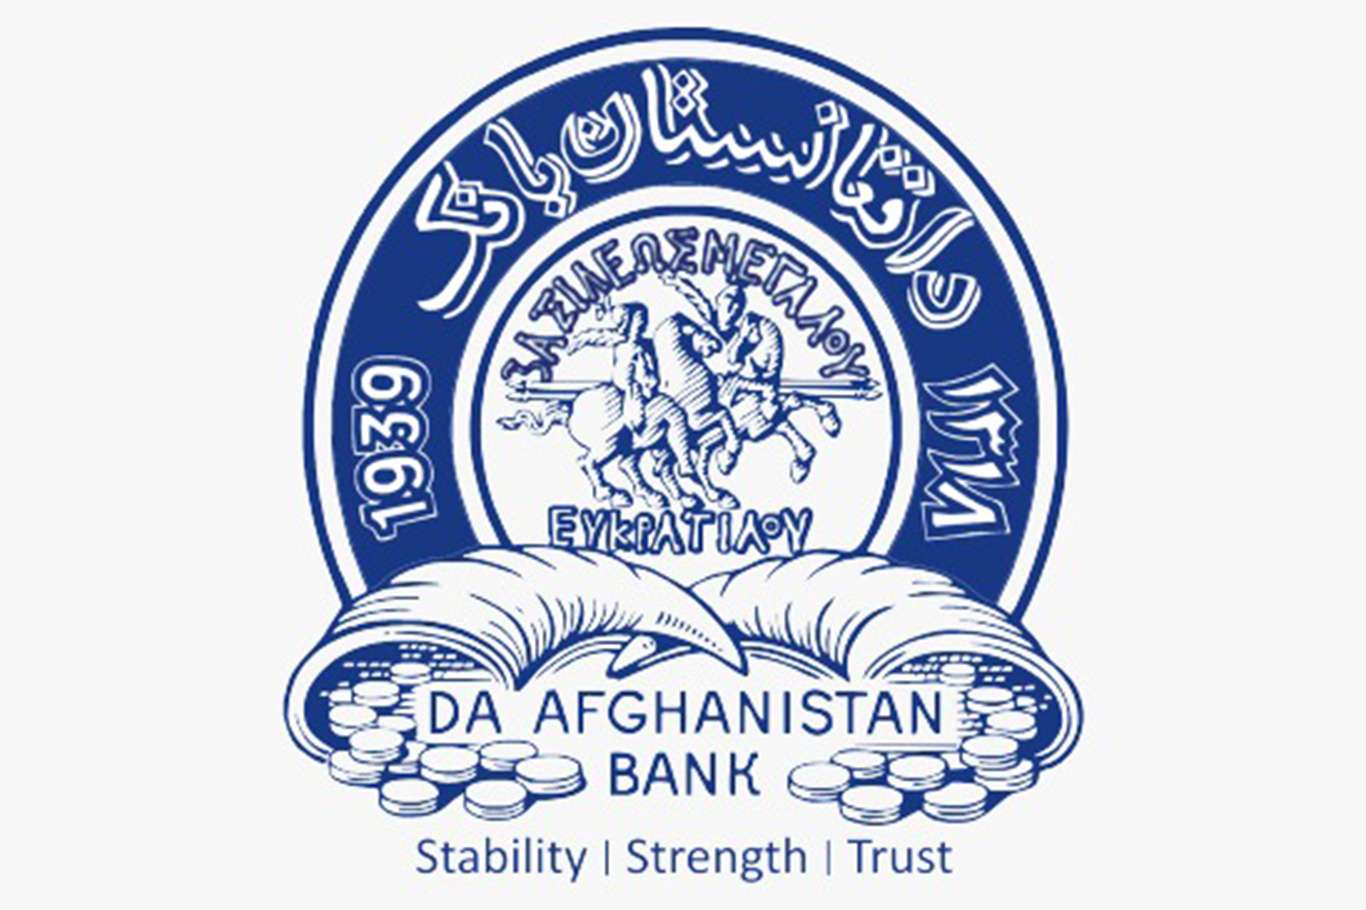 Afghan central bank: No formal notification yet pertaining to an asset freeze